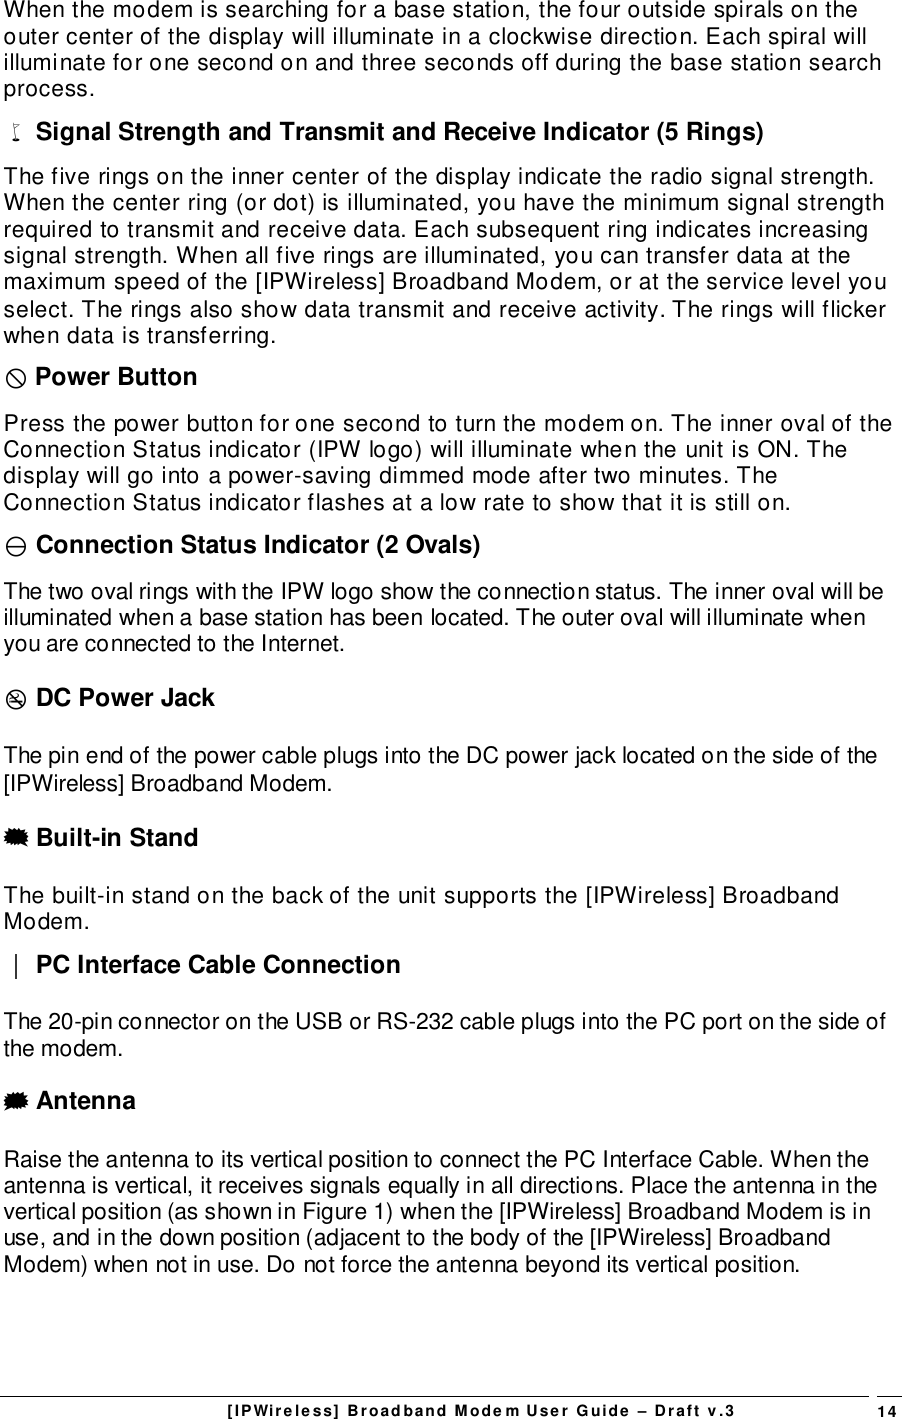 [IPWireless] Broadband Modem User Guide – Draft v.3 14When the modem is searching for a base station, the four outside spirals on theouter center of the display will illuminate in a clockwise direction. Each spiral willilluminate for one second on and three seconds off during the base station searchprocess.% Signal Strength and Transmit and Receive Indicator (5 Rings)The five rings on the inner center of the display indicate the radio signal strength.When the center ring (or dot) is illuminated, you have the minimum signal strengthrequired to transmit and receive data. Each subsequent ring indicates increasingsignal strength. When all five rings are illuminated, you can transfer data at themaximum speed of the [IPWireless] Broadband Modem, or at the service level youselect. The rings also show data transmit and receive activity. The rings will flickerwhen data is transferring.$ Power ButtonPress the power button for one second to turn the modem on. The inner oval of theConnection Status indicator (IPW logo) will illuminate when the unit is ON. Thedisplay will go into a power-saving dimmed mode after two minutes. TheConnection Status indicator flashes at a low rate to show that it is still on.) Connection Status Indicator (2 Ovals)The two oval rings with the IPW logo show the connection status. The inner oval will beilluminated when a base station has been located. The outer oval will illuminate whenyou are connected to the Internet.( DC Power JackThe pin end of the power cable plugs into the DC power jack located on the side of the[IPWireless] Broadband Modem.&amp; Built-in StandThe built-in stand on the back of the unit supports the [IPWireless] BroadbandModem.&apos; PC Interface Cable ConnectionThe 20-pin connector on the USB or RS-232 cable plugs into the PC port on the side ofthe modem.# AntennaRaise the antenna to its vertical position to connect the PC Interface Cable. When theantenna is vertical, it receives signals equally in all directions. Place the antenna in thevertical position (as shown in Figure 1) when the [IPWireless] Broadband Modem is inuse, and in the down position (adjacent to the body of the [IPWireless] BroadbandModem) when not in use. Do not force the antenna beyond its vertical position.